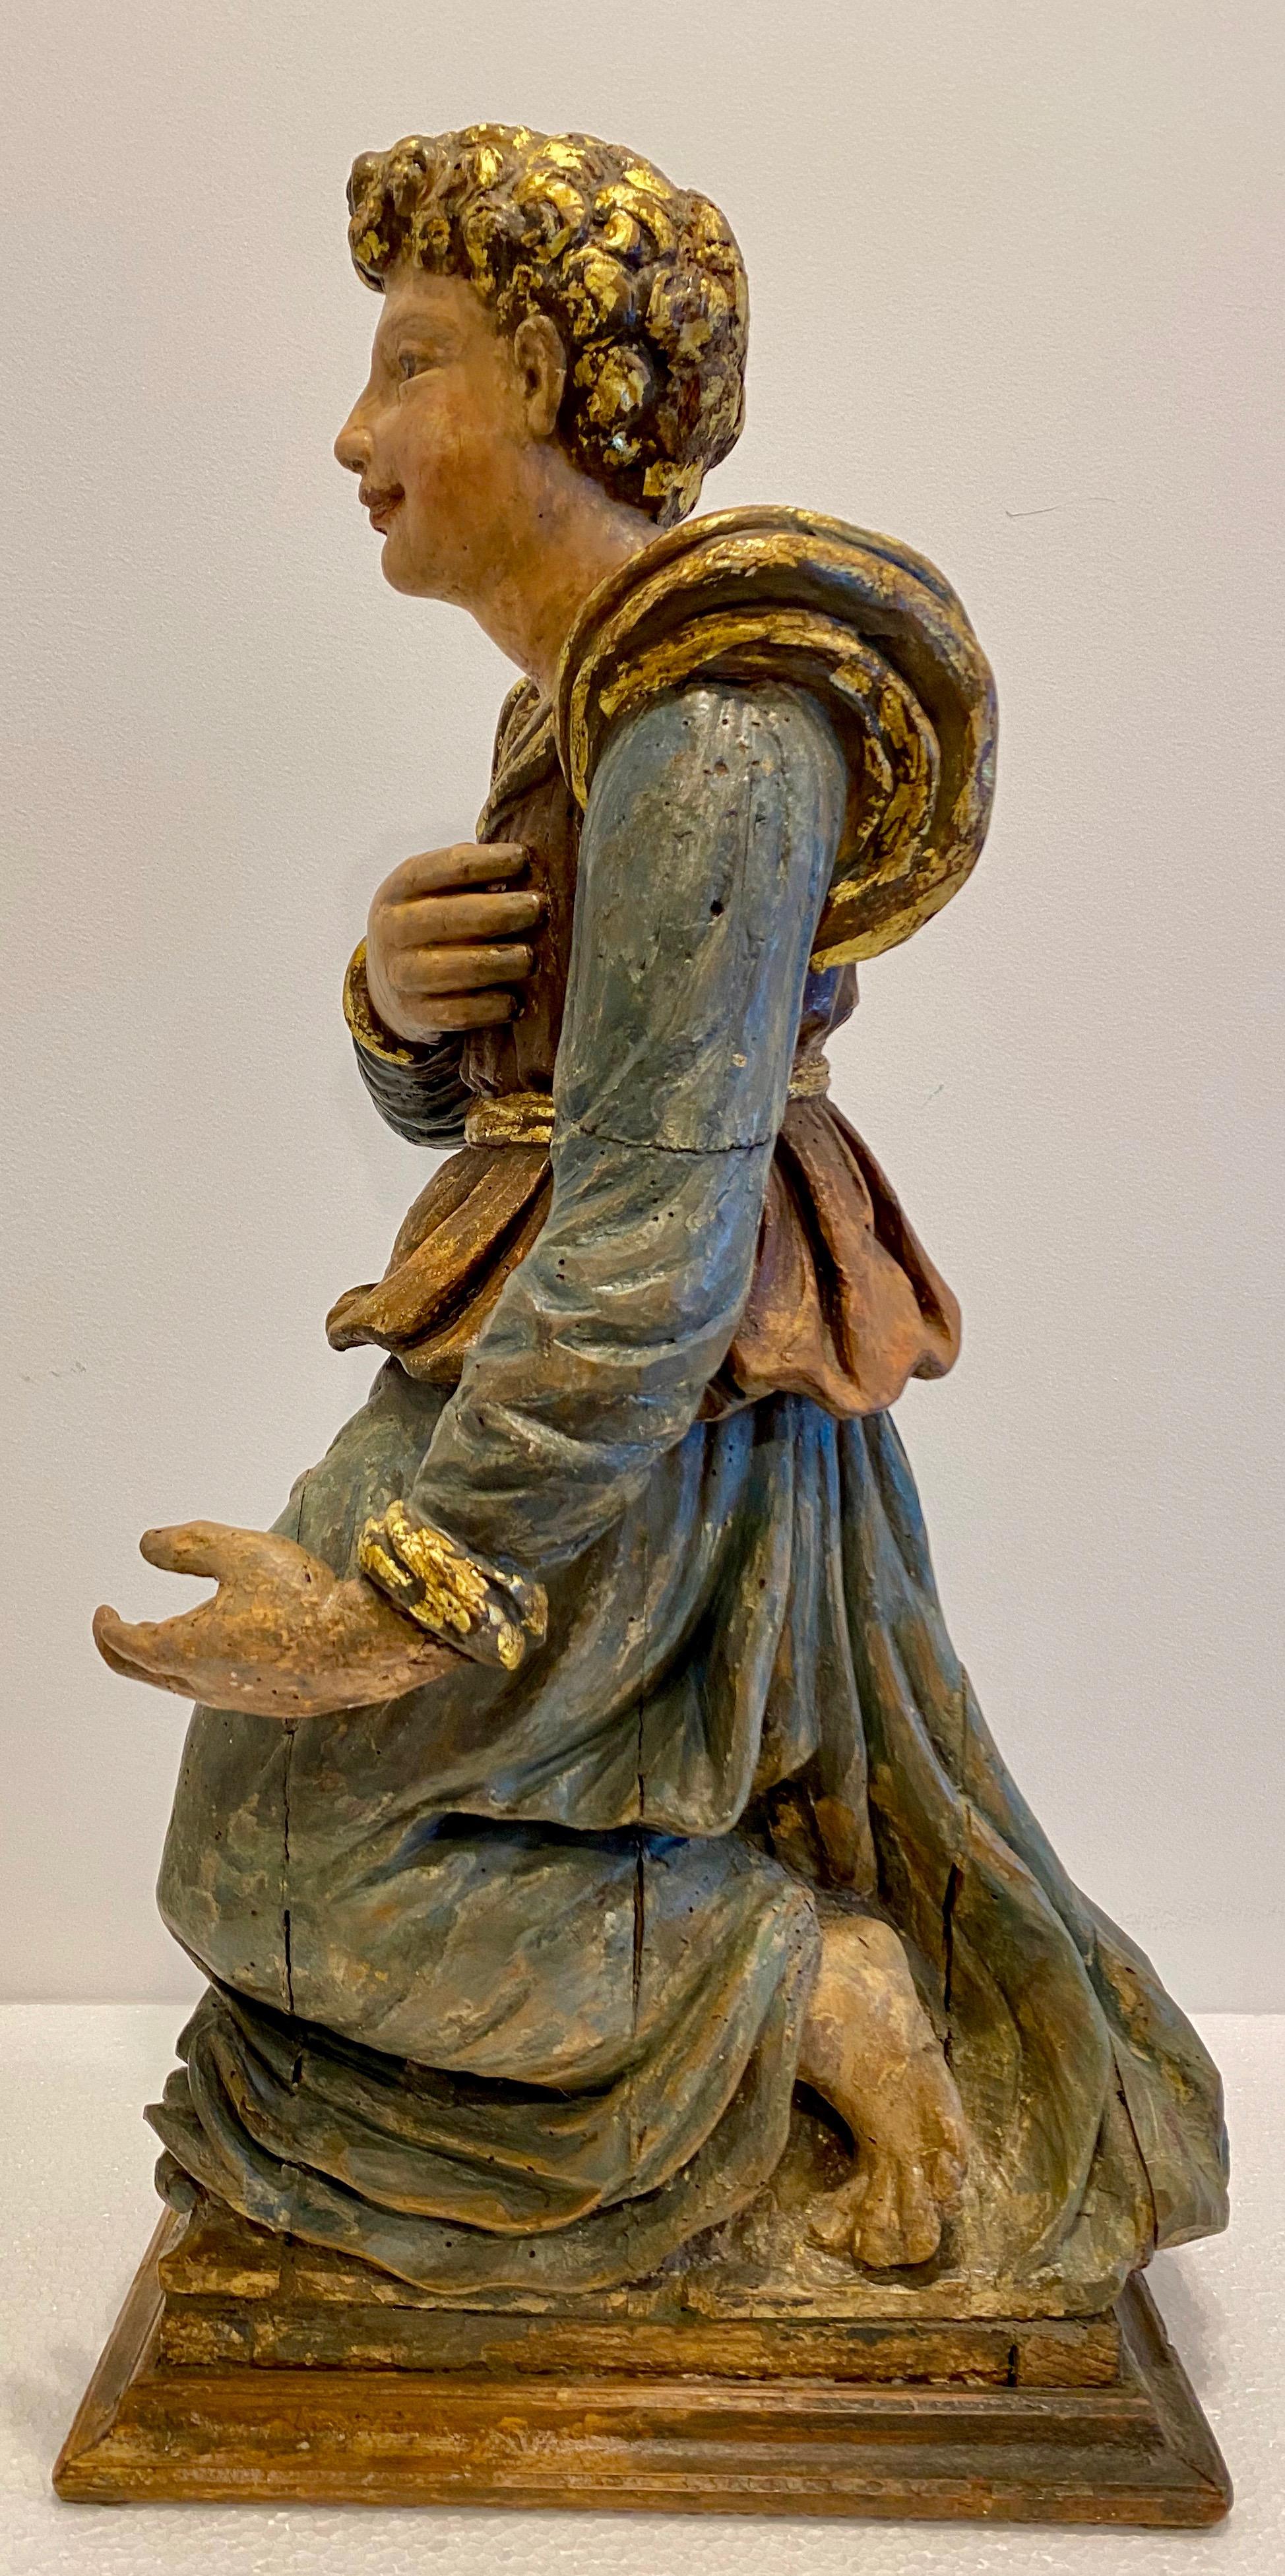 Italian Painted and Lacquered Wooden Sculpture of a Kneeling Figure, Circa 1650 For Sale 2